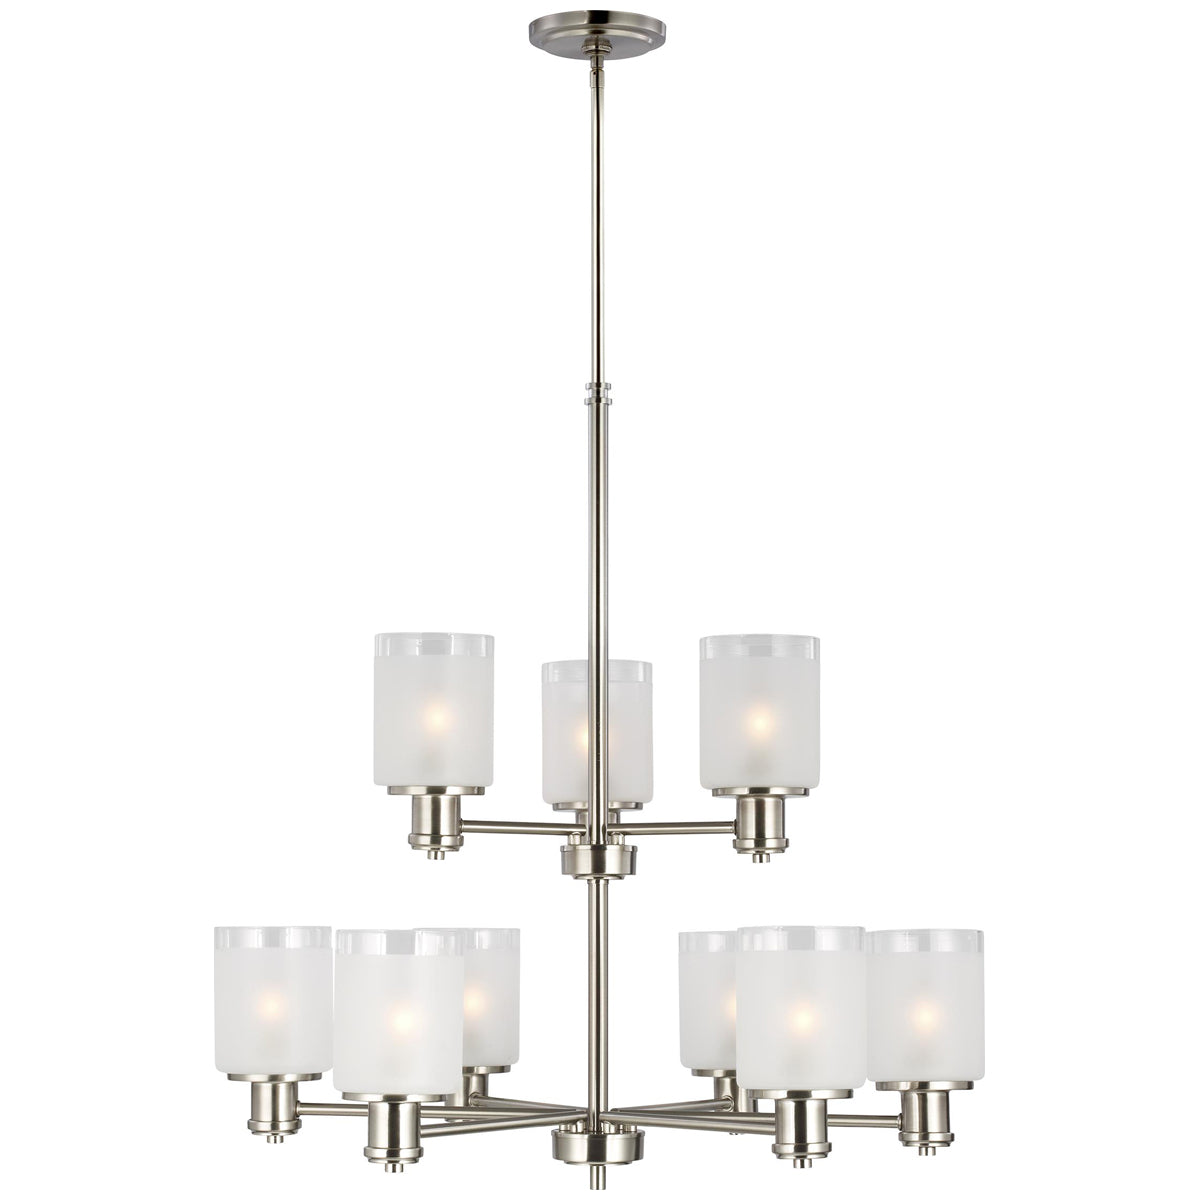 Sea Gull Lighting Norwood 9-Light Chandelier without Bulb